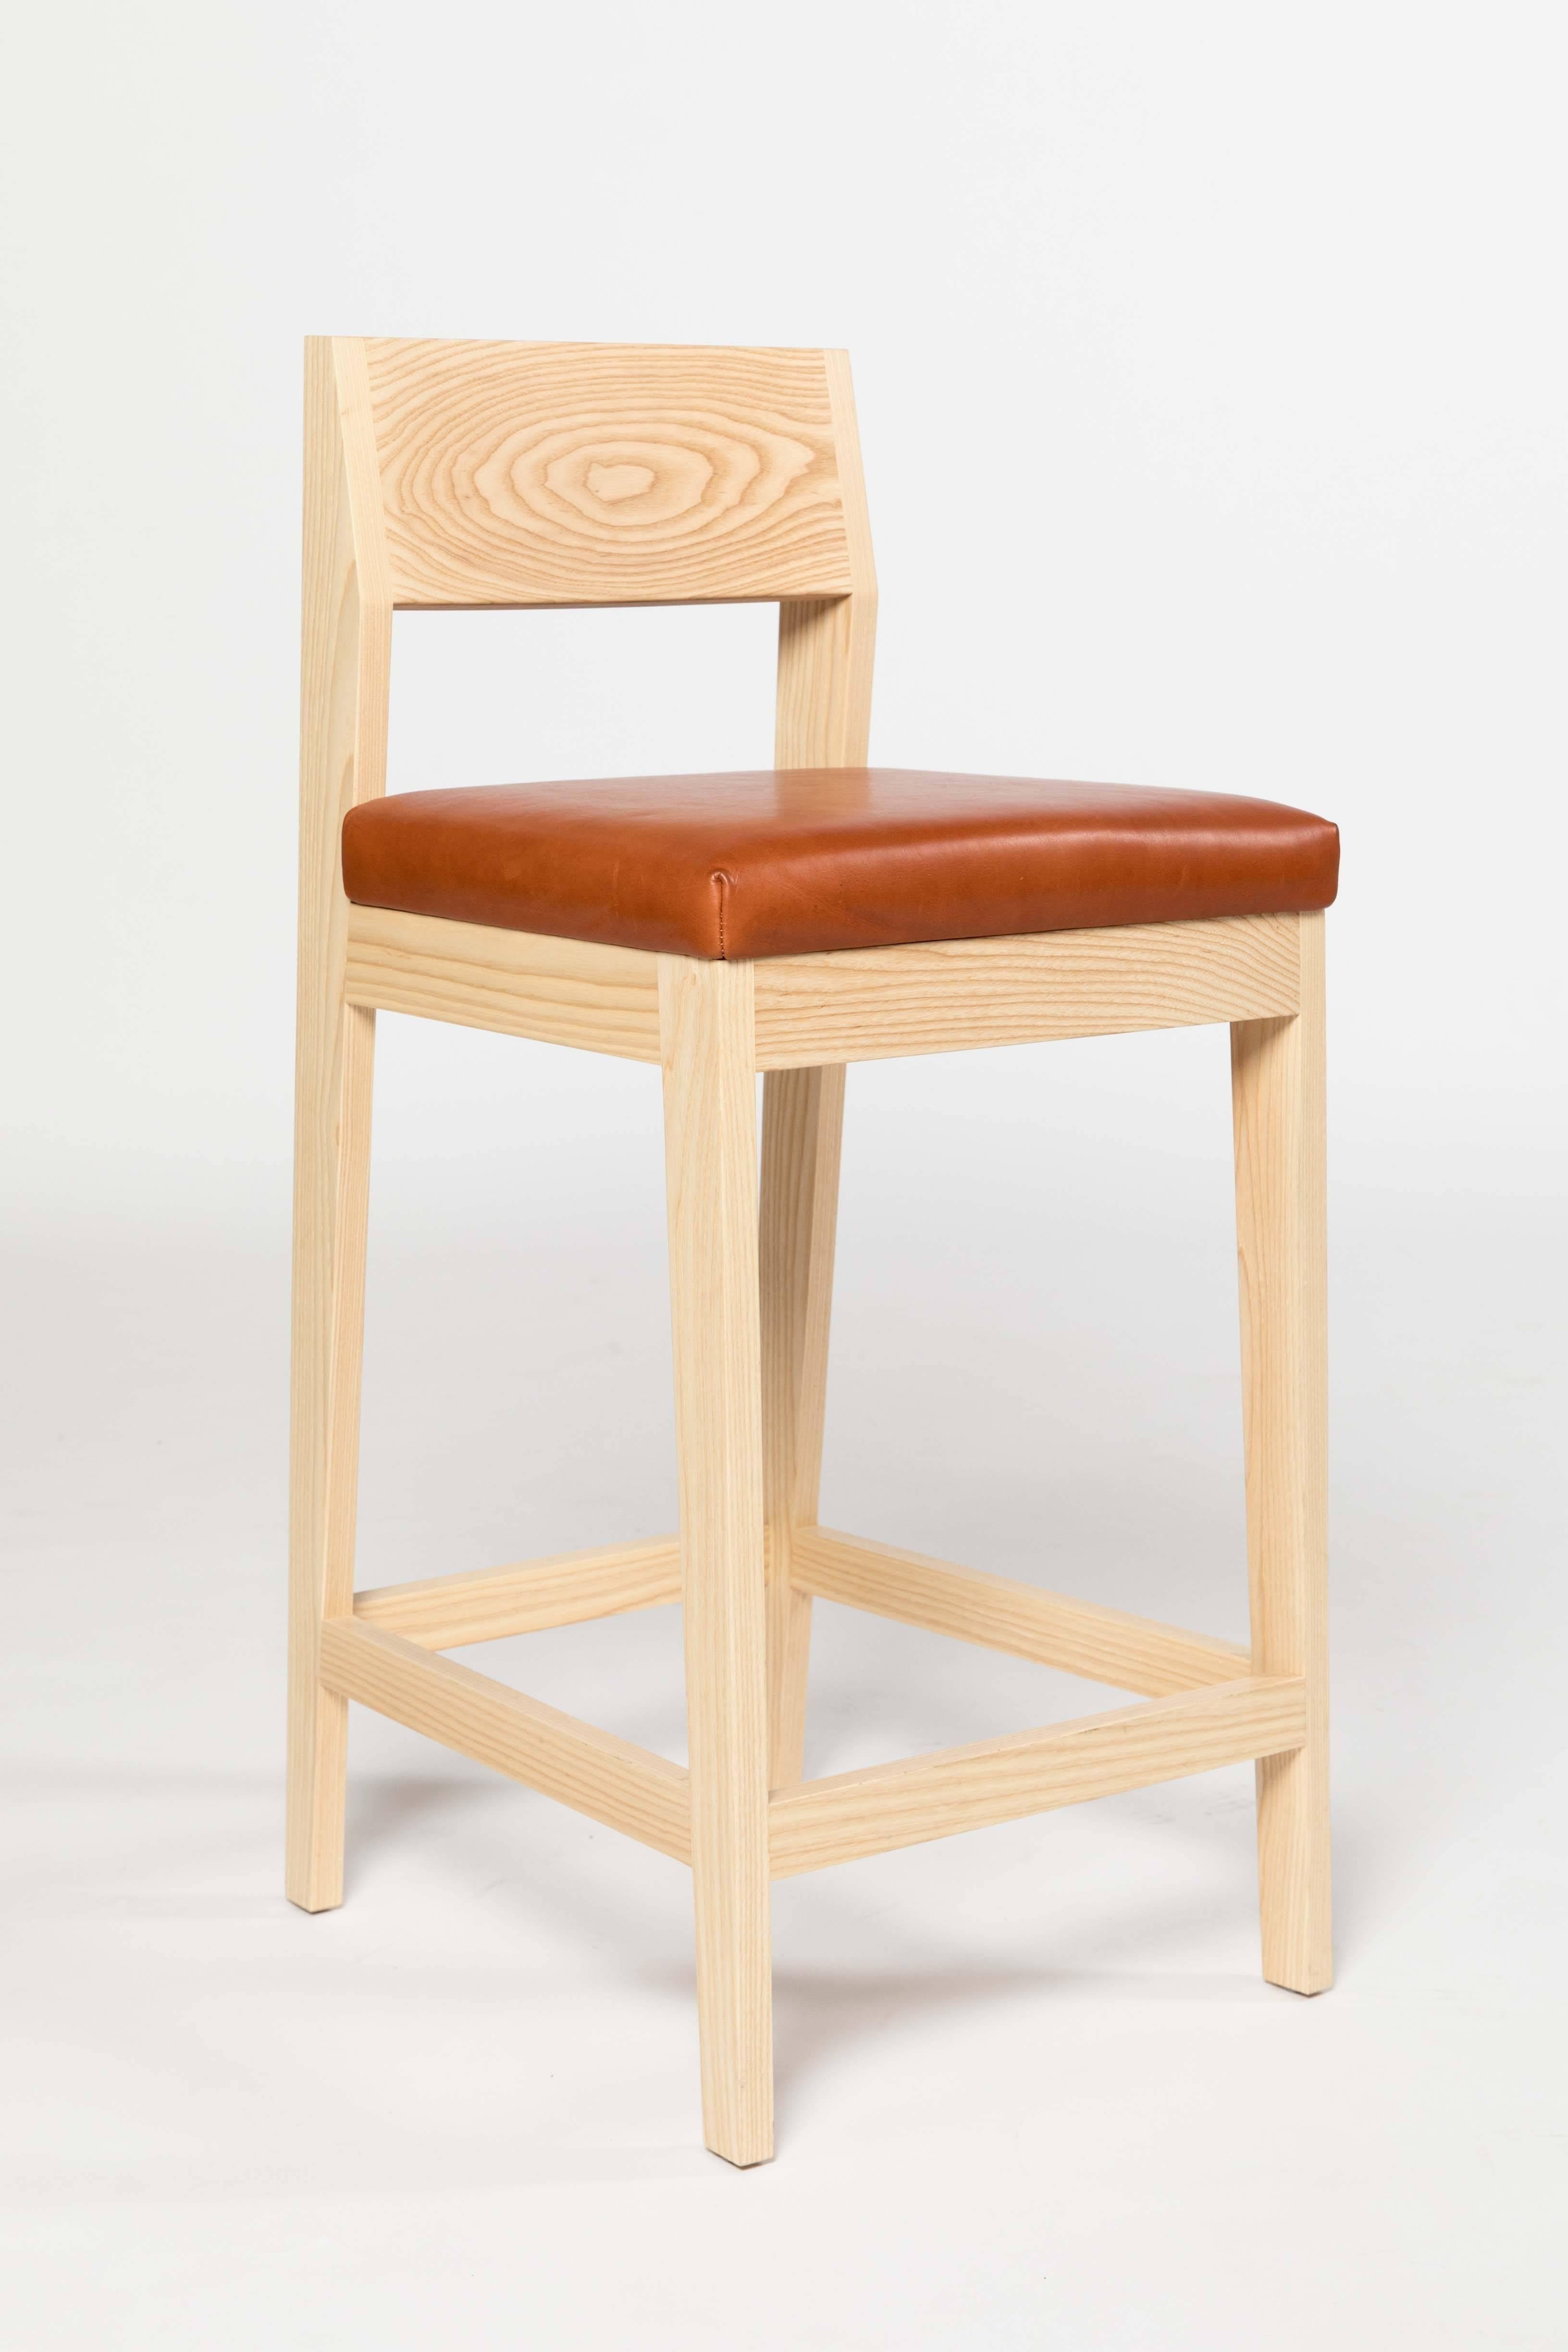 The Shelley stool by Kate Duncan is handcrafted from solid wood. It incorporates clean lines and intersecting angles to maximize comfort. This high stool features a sloped curved back that cradles resting shoulders and a leather seat with integrated